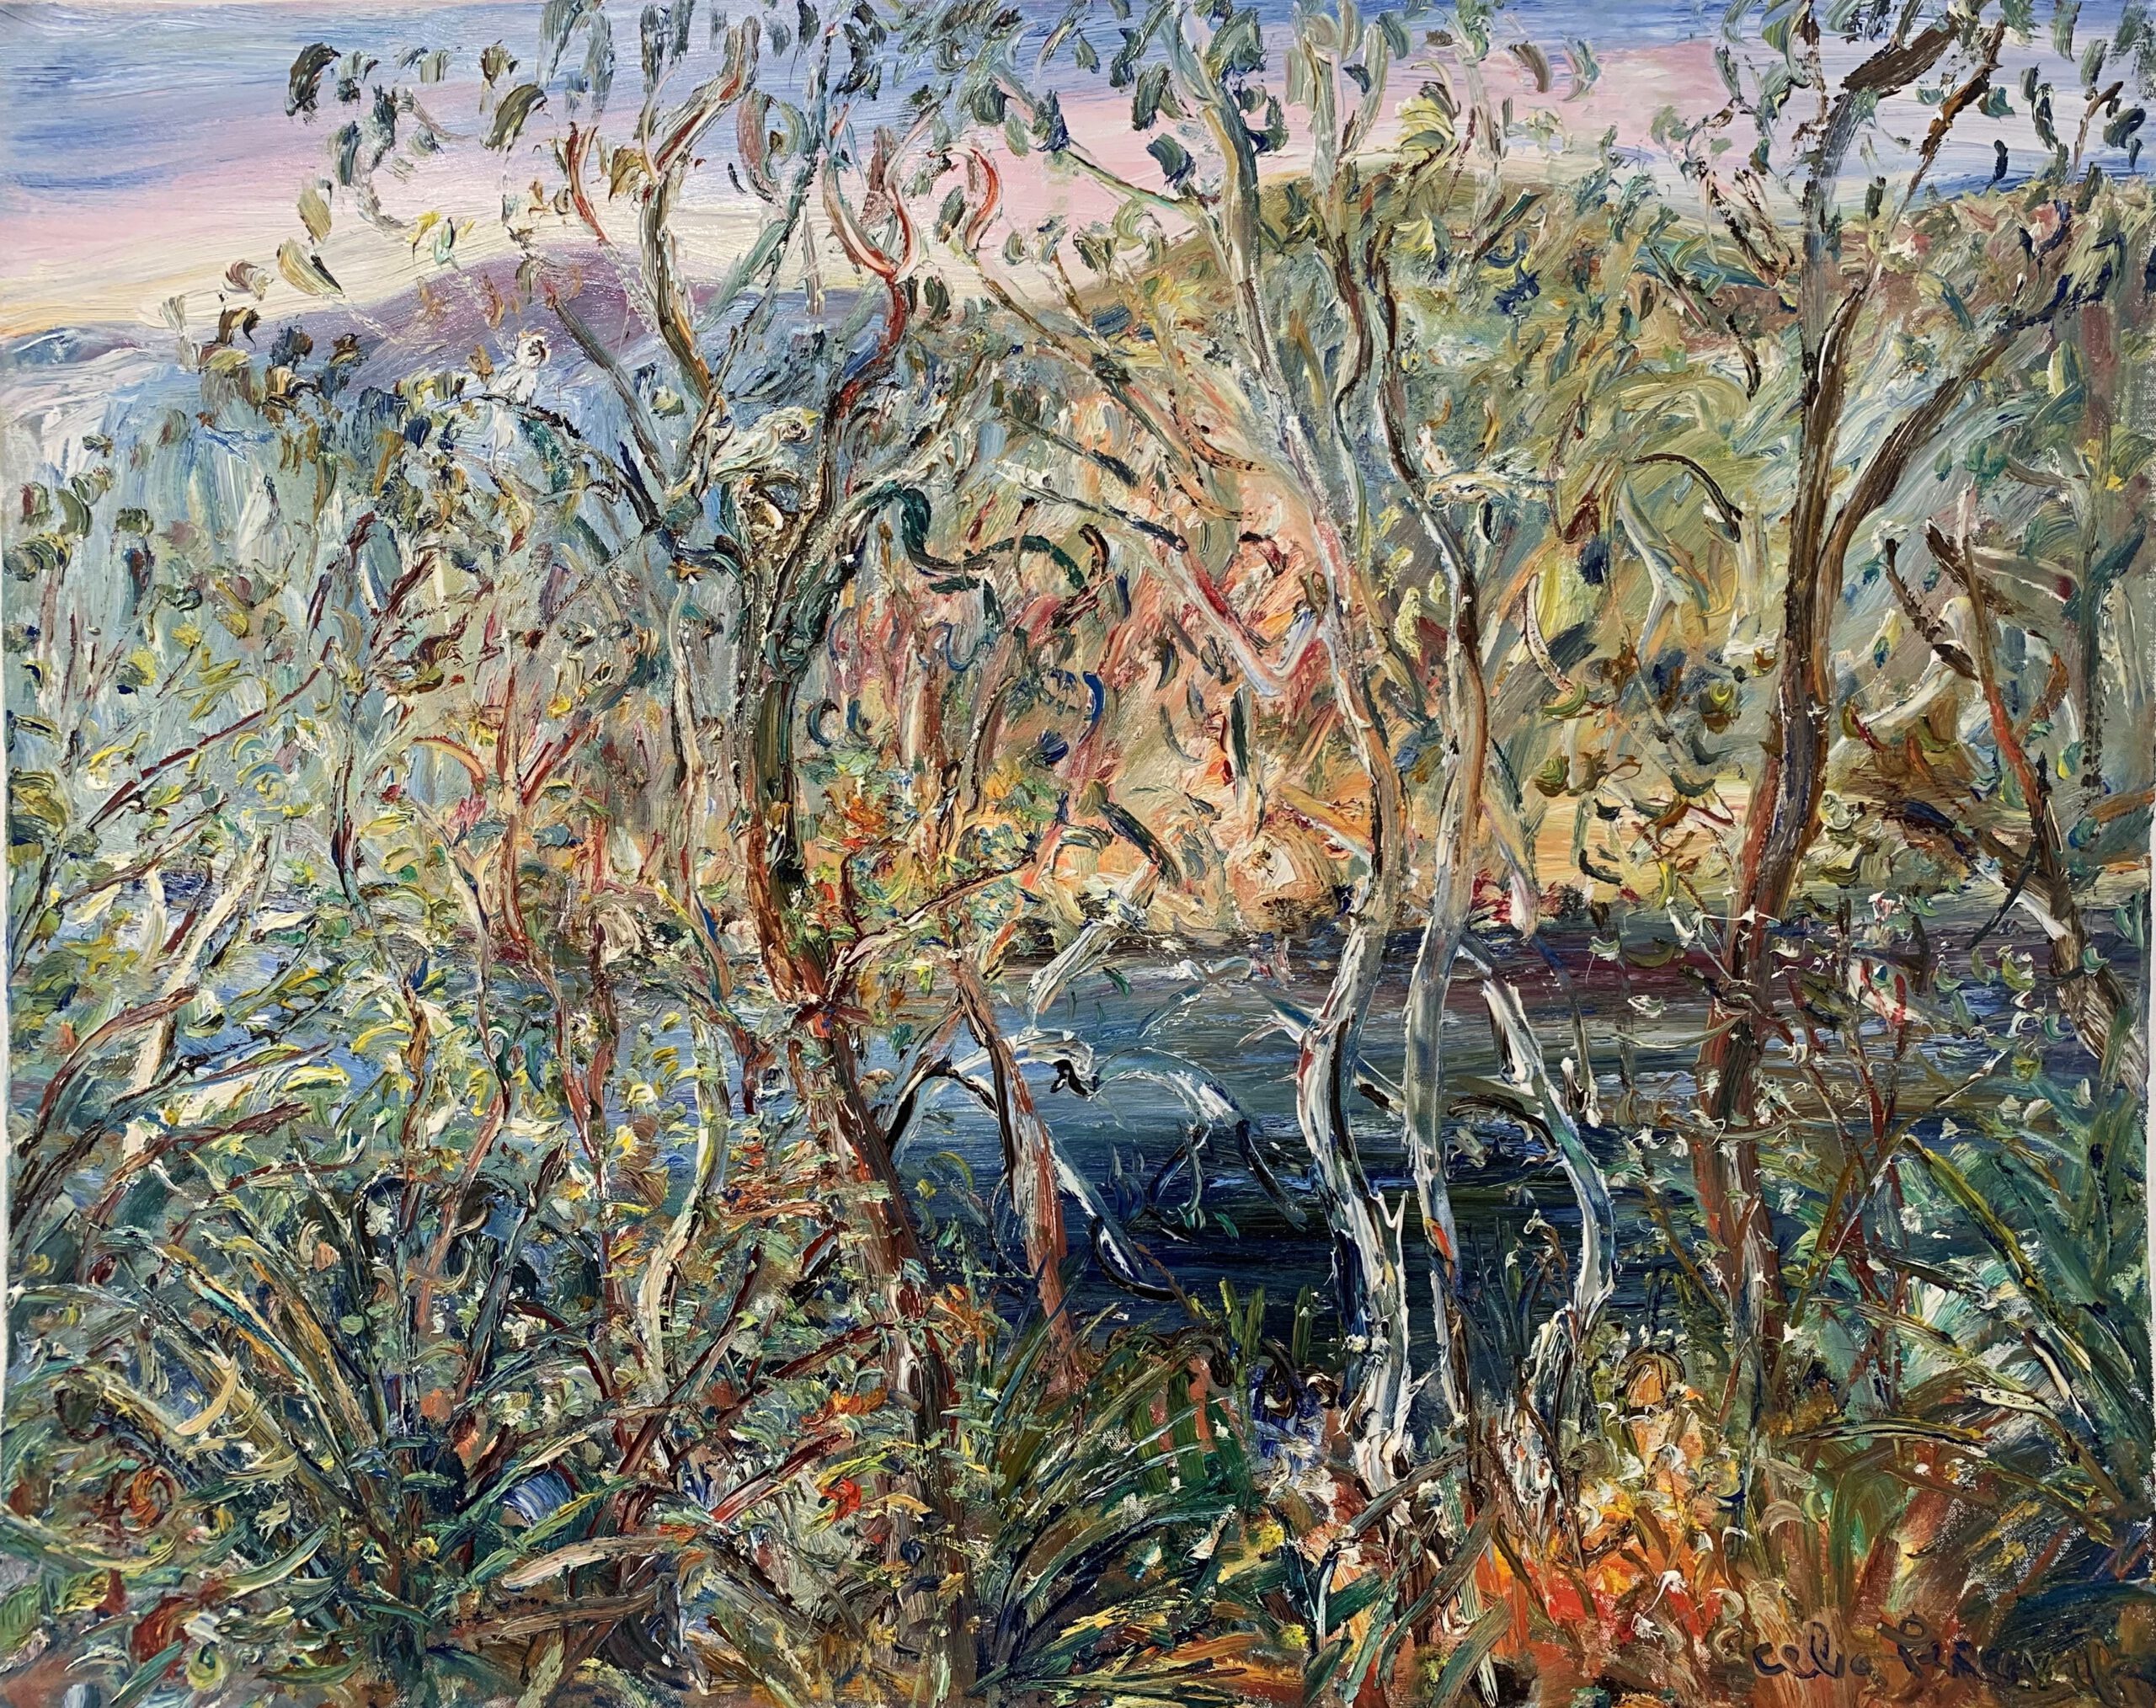 Perceval-Hacking River Cockies Nesting Royal National Park-oil on linen-80 x 100cm-master